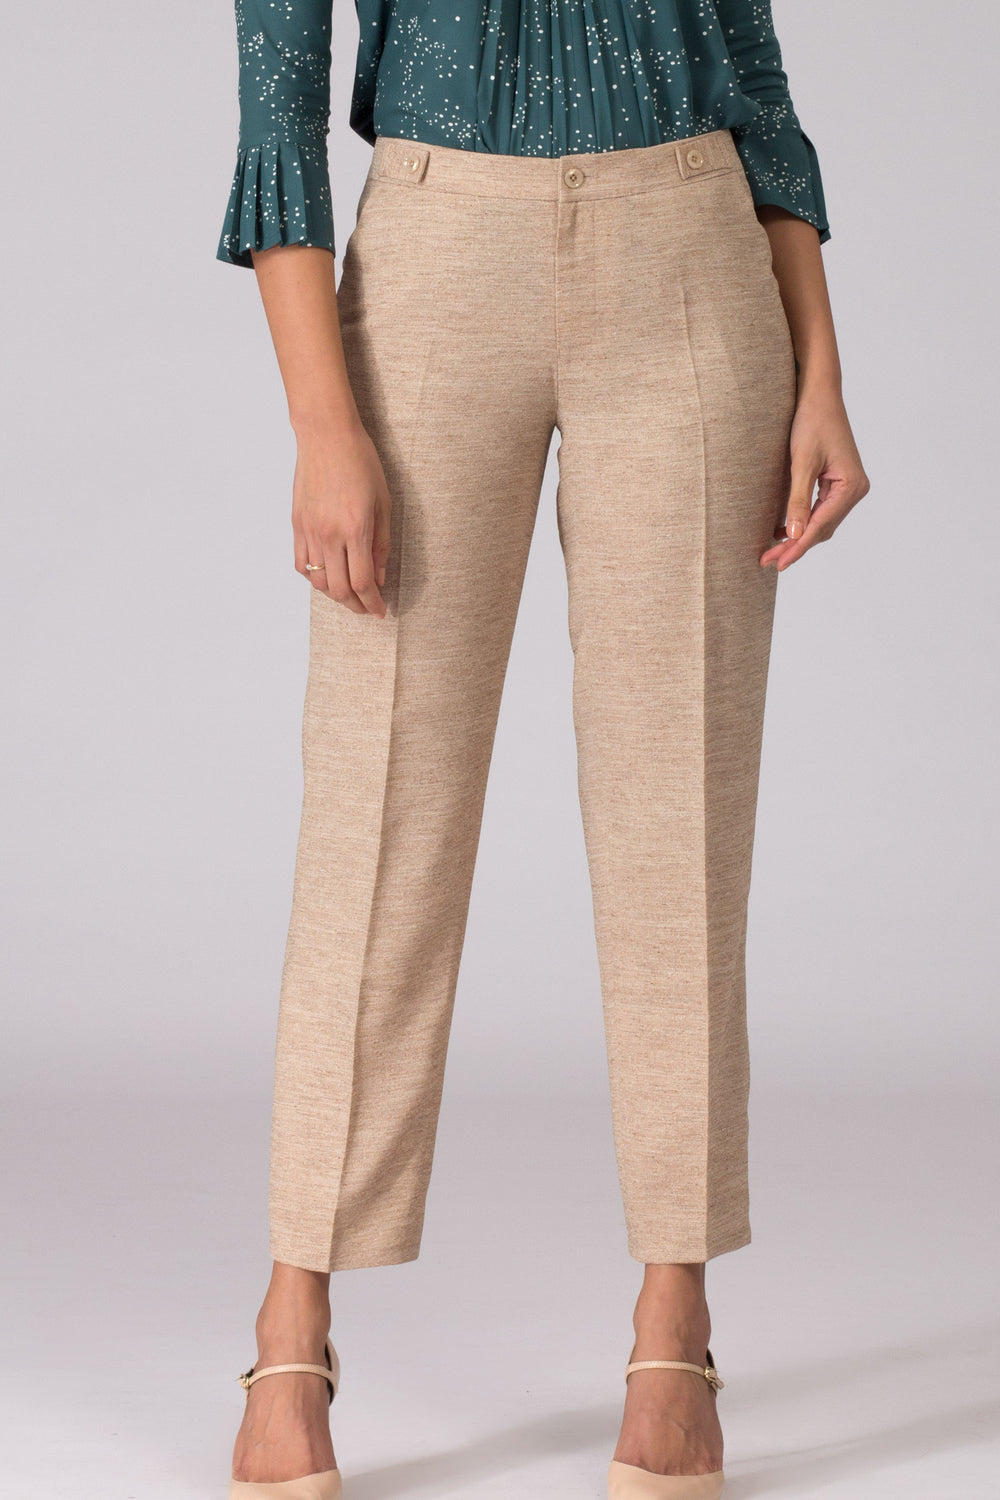 Buy Online Plus Size a Beige Solid Formal Trouser at best price  Plussin